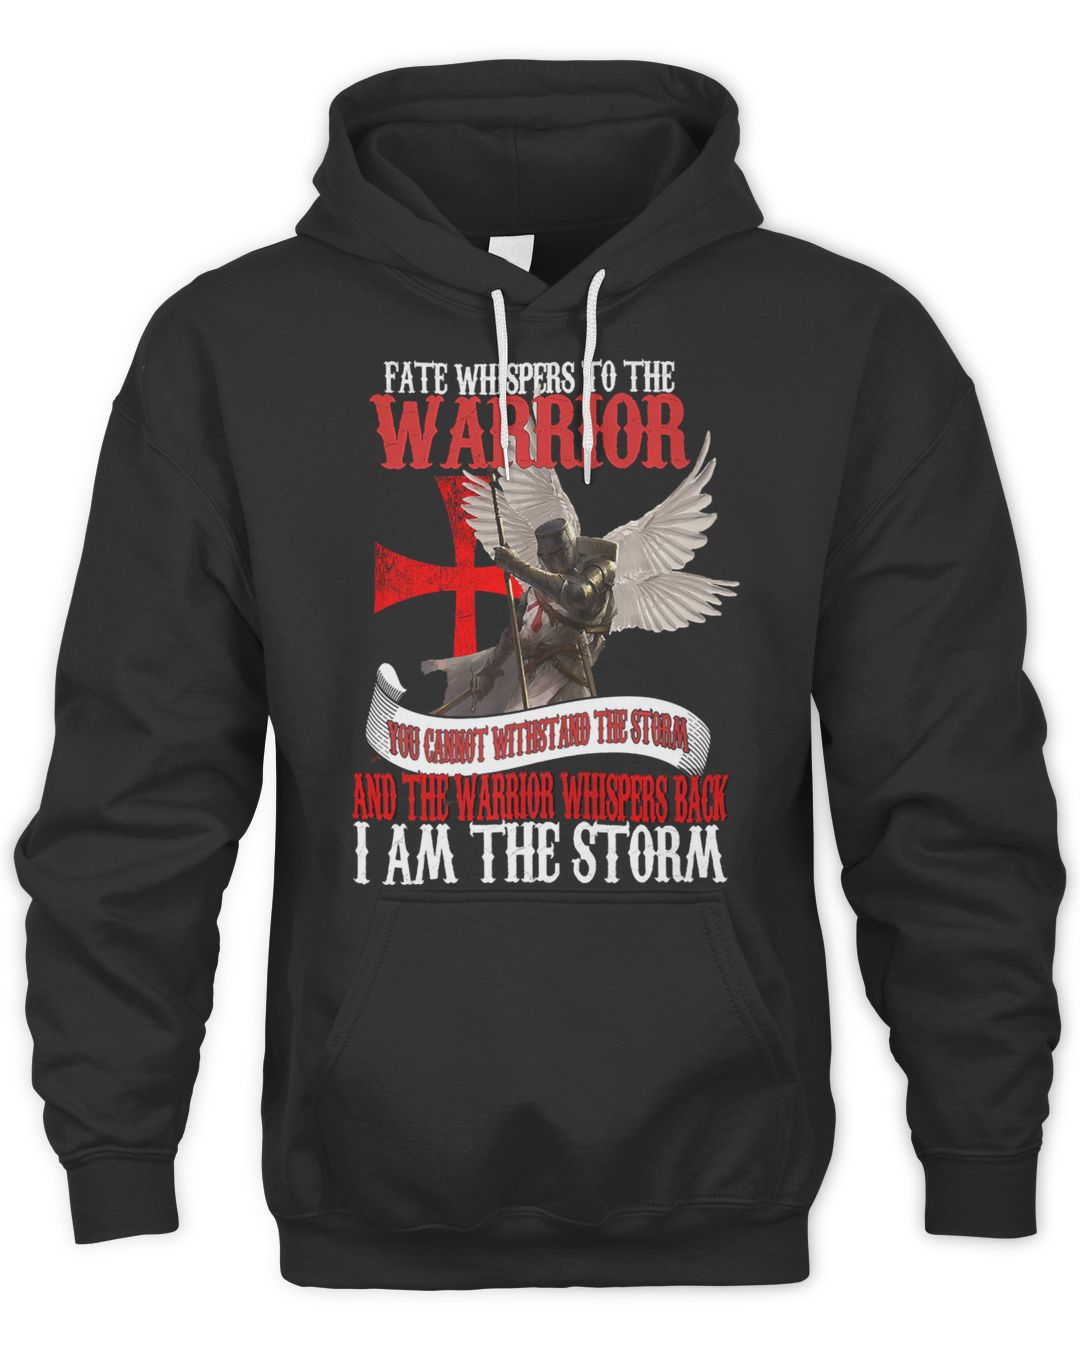 Knights Templar Hoodie - Fate Whispers To The Warrior You Cannot ...